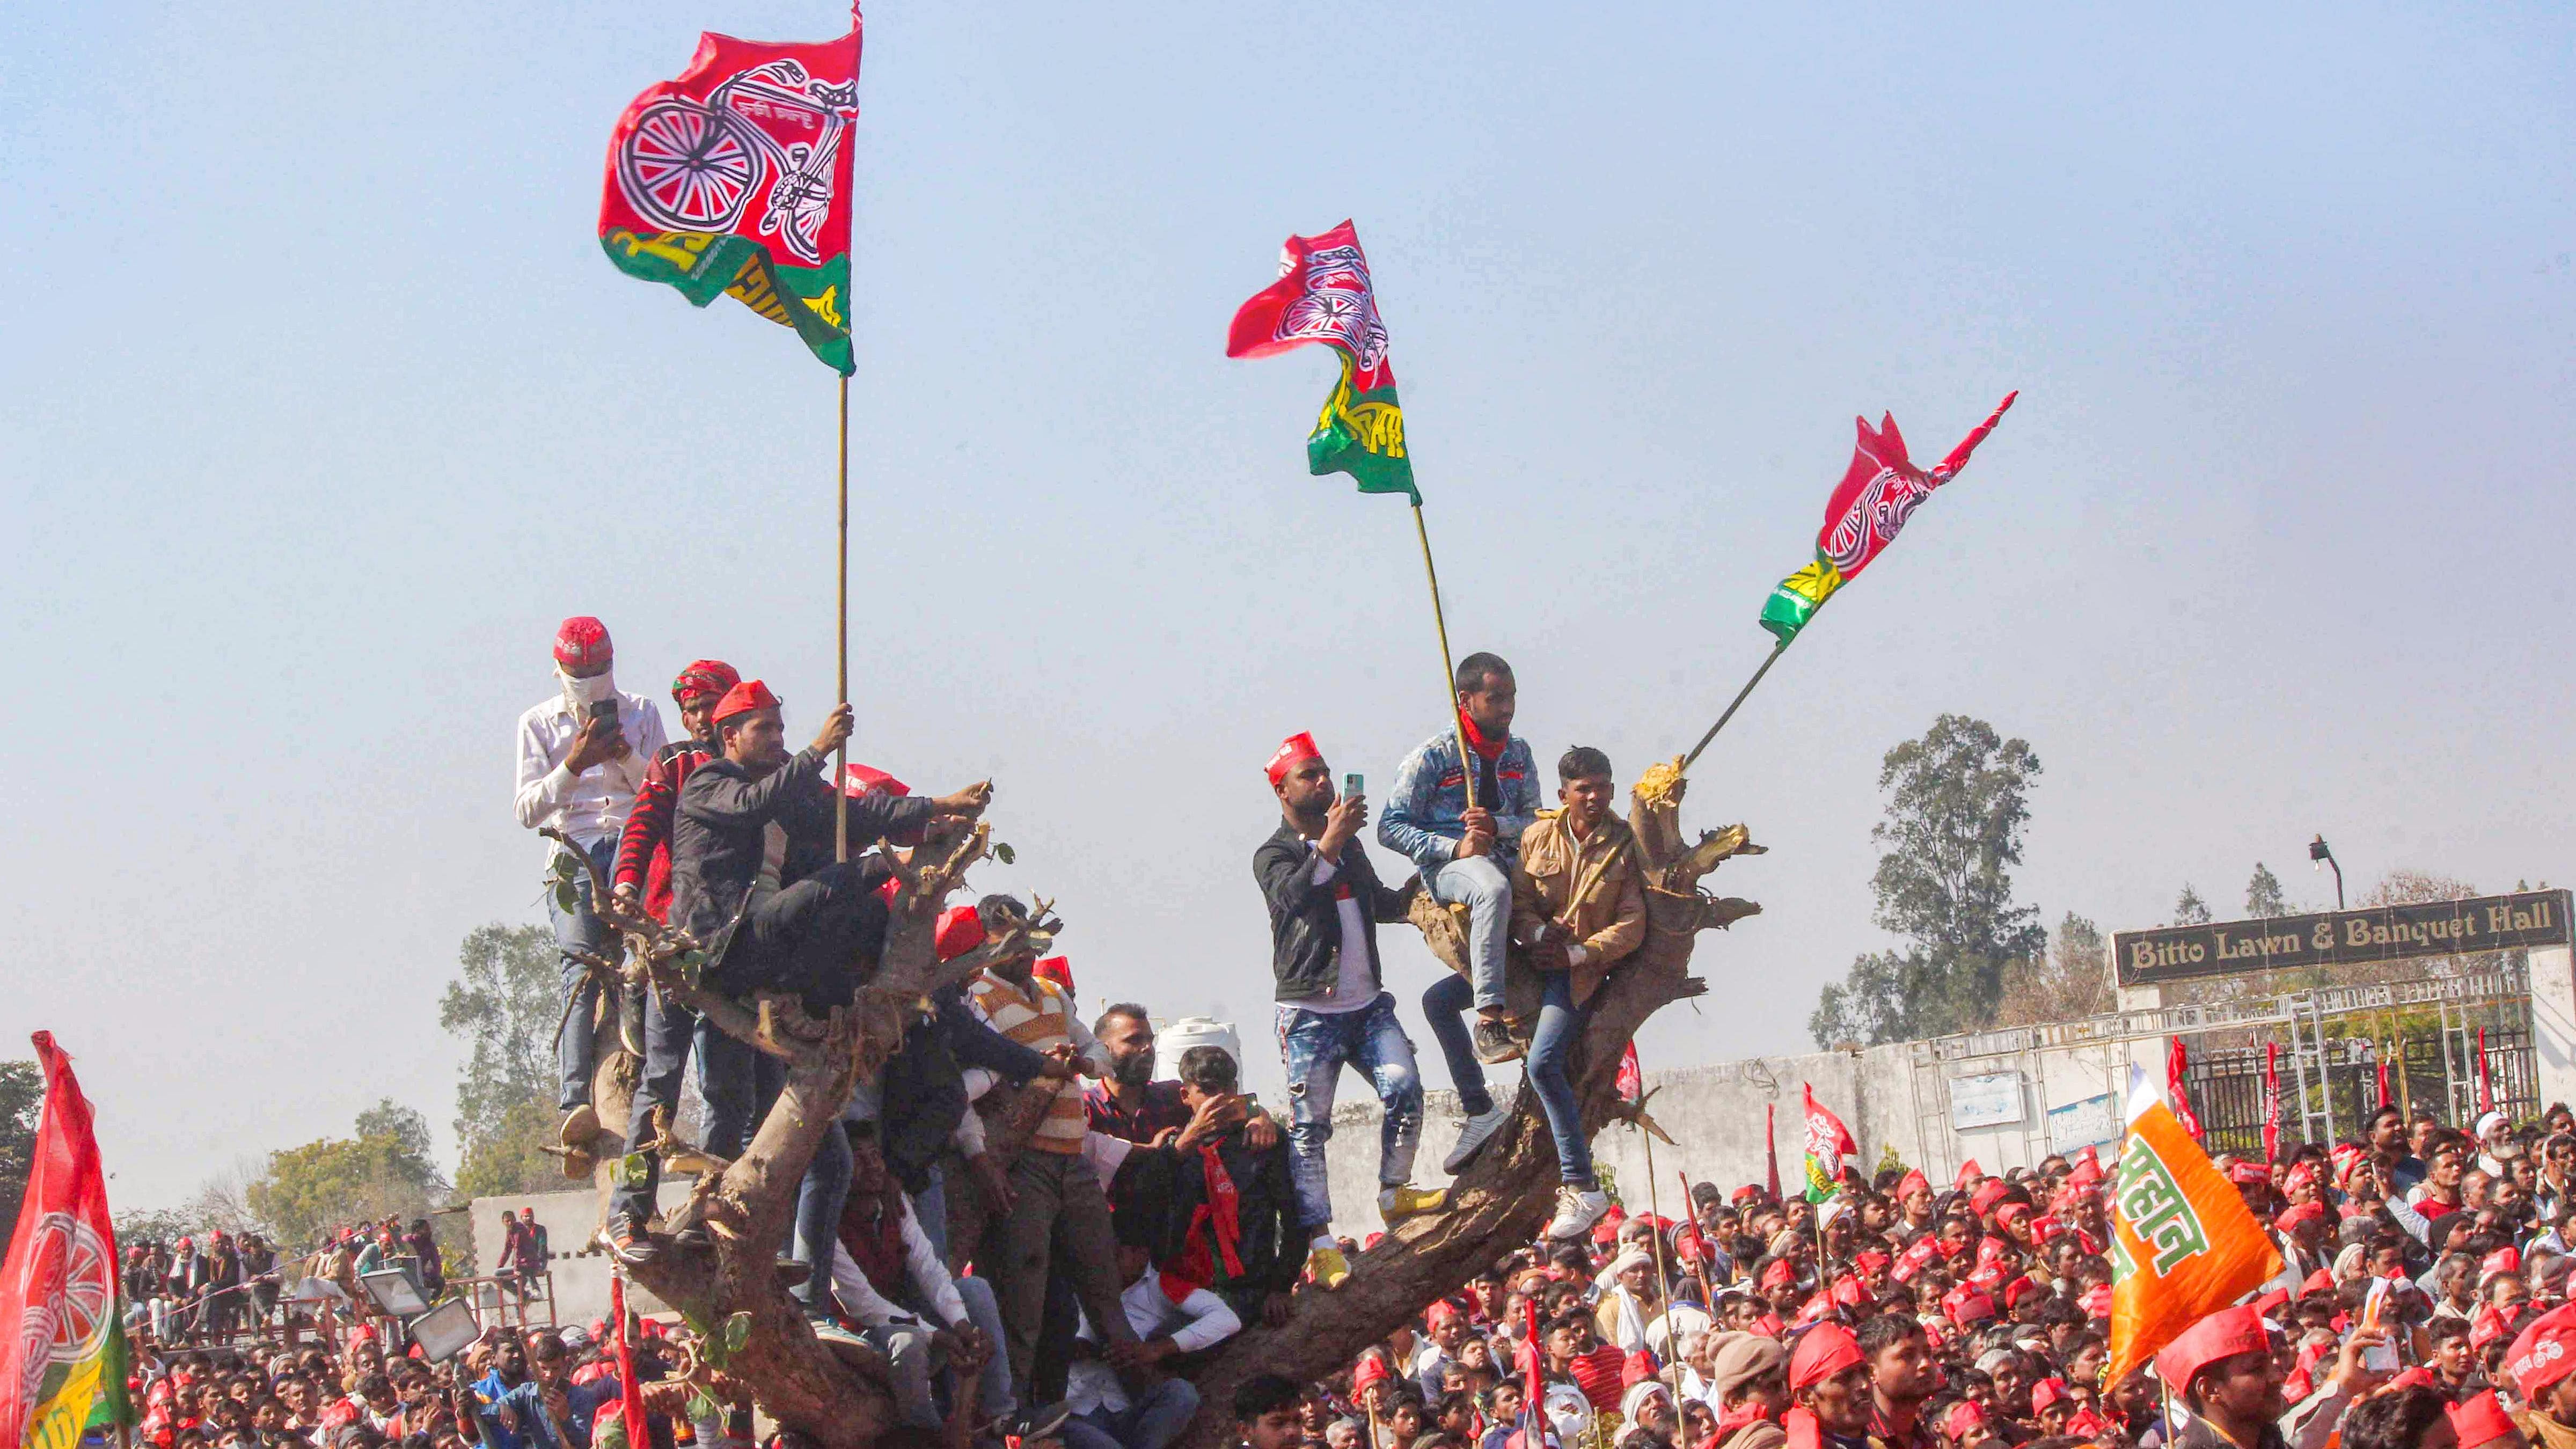  SP is also planning on bringing the focus on issues concerning the law and order, health, farmers and the youths to corner the BJP government in the state. Credit: PTI Photo